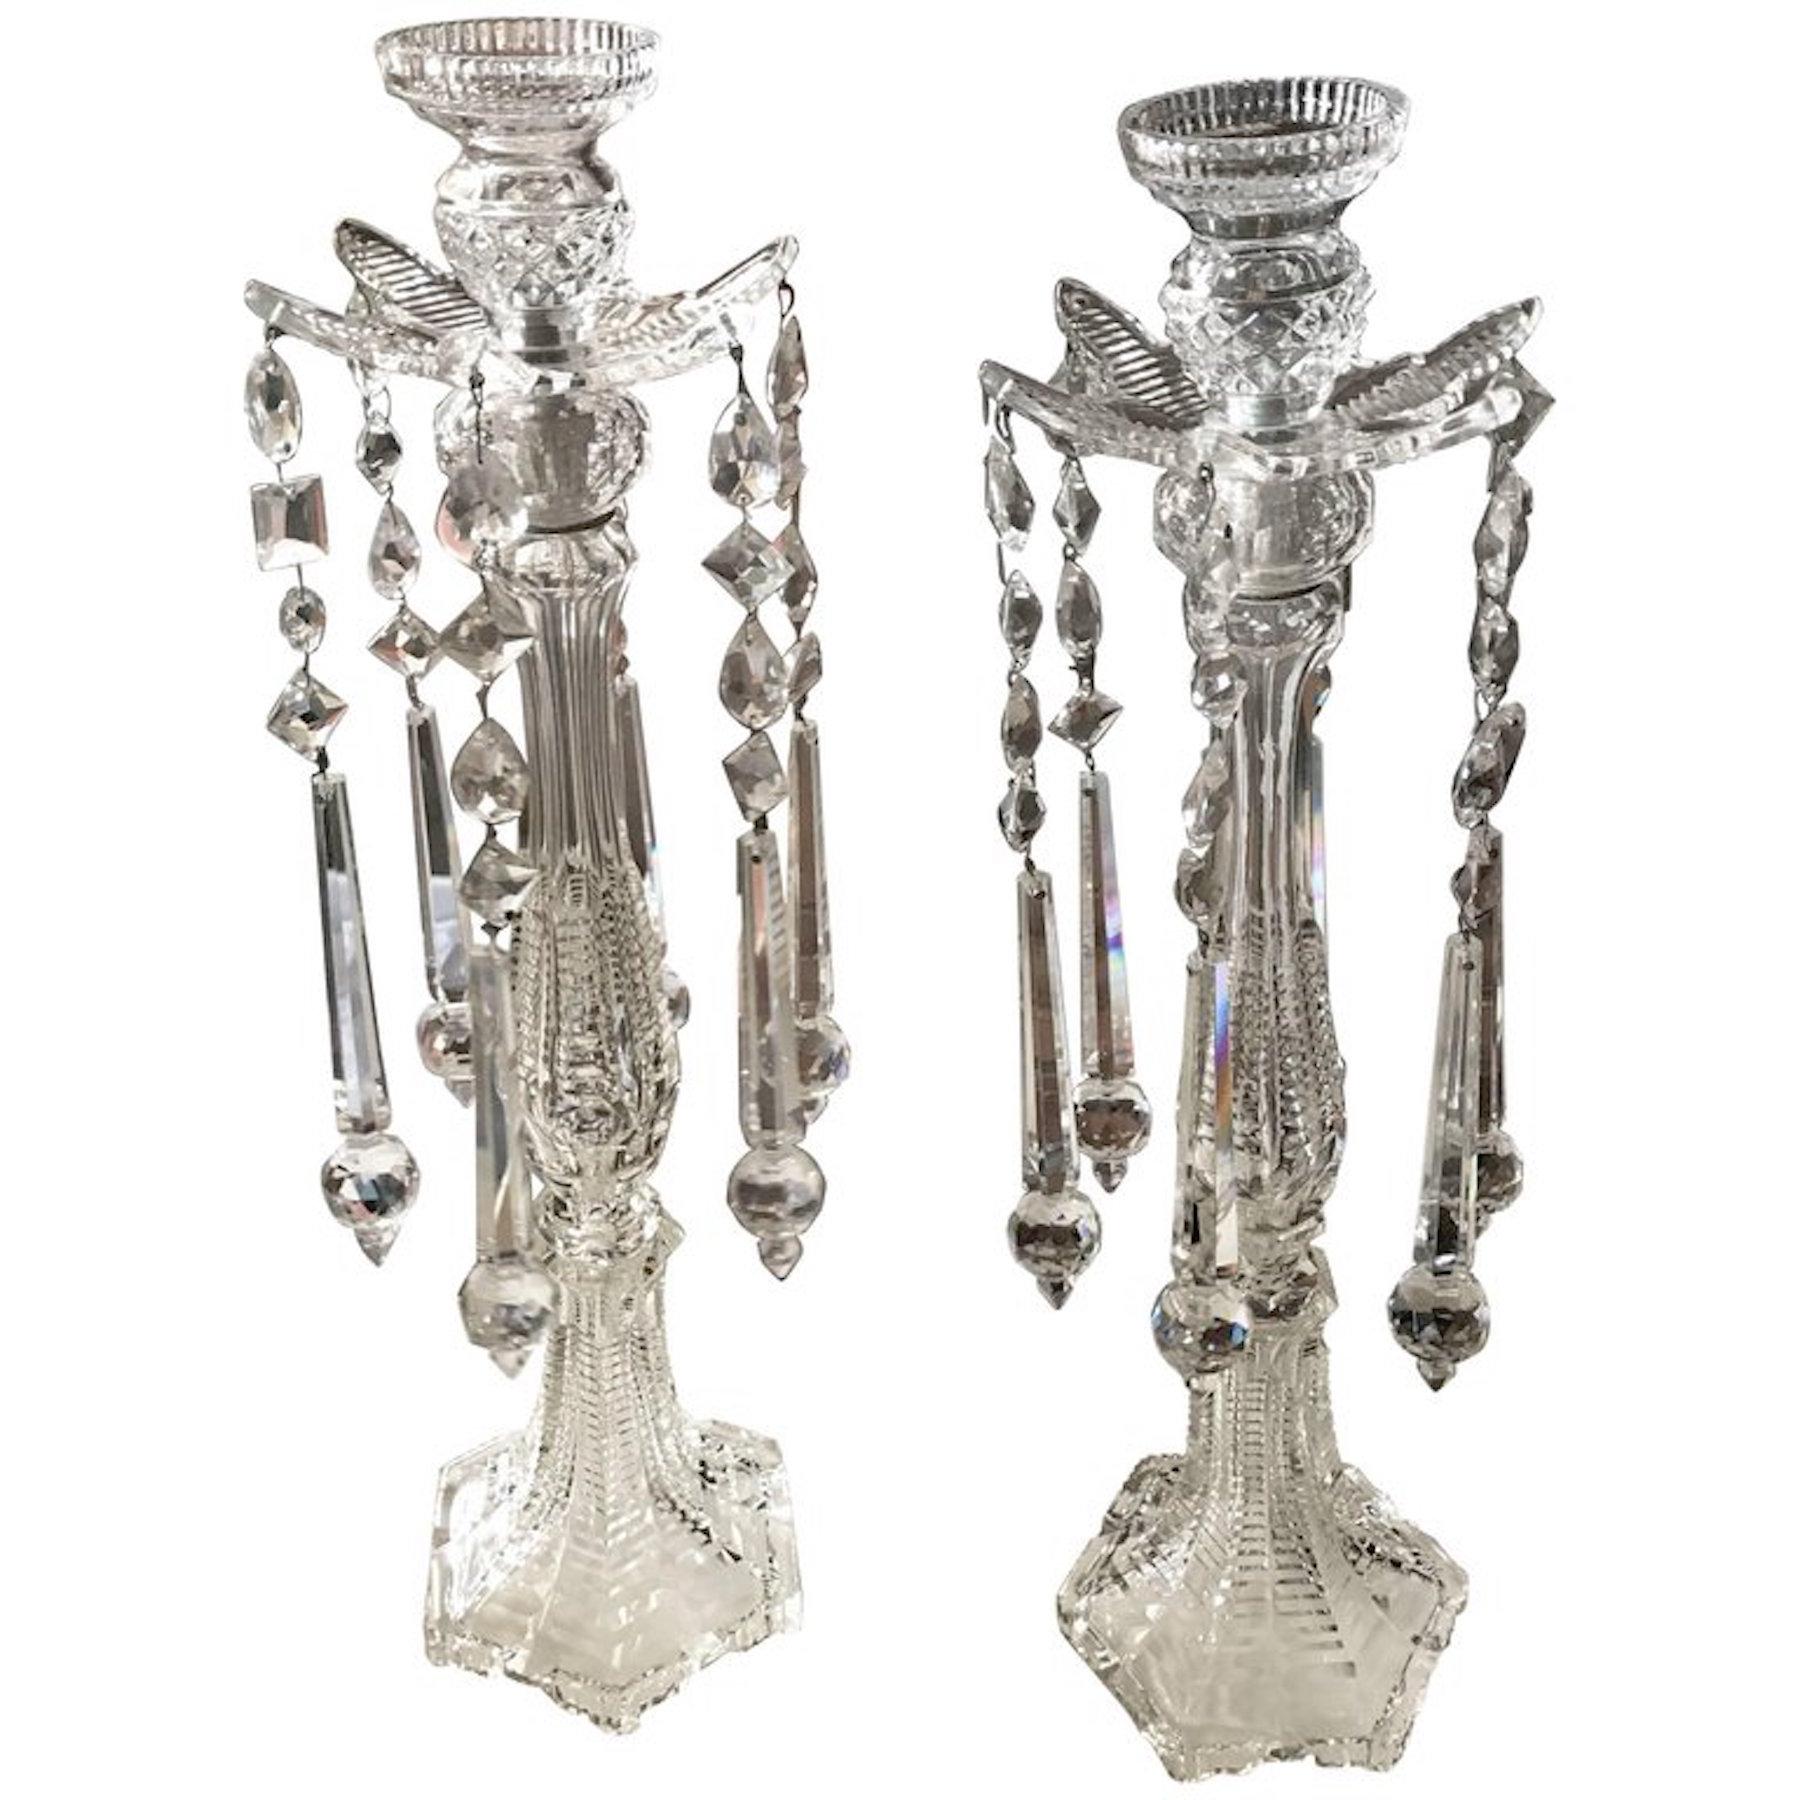 English Sumptuous Pair of Cut Crystal Tall Candlesticks, Attributed to F.&C. Osler